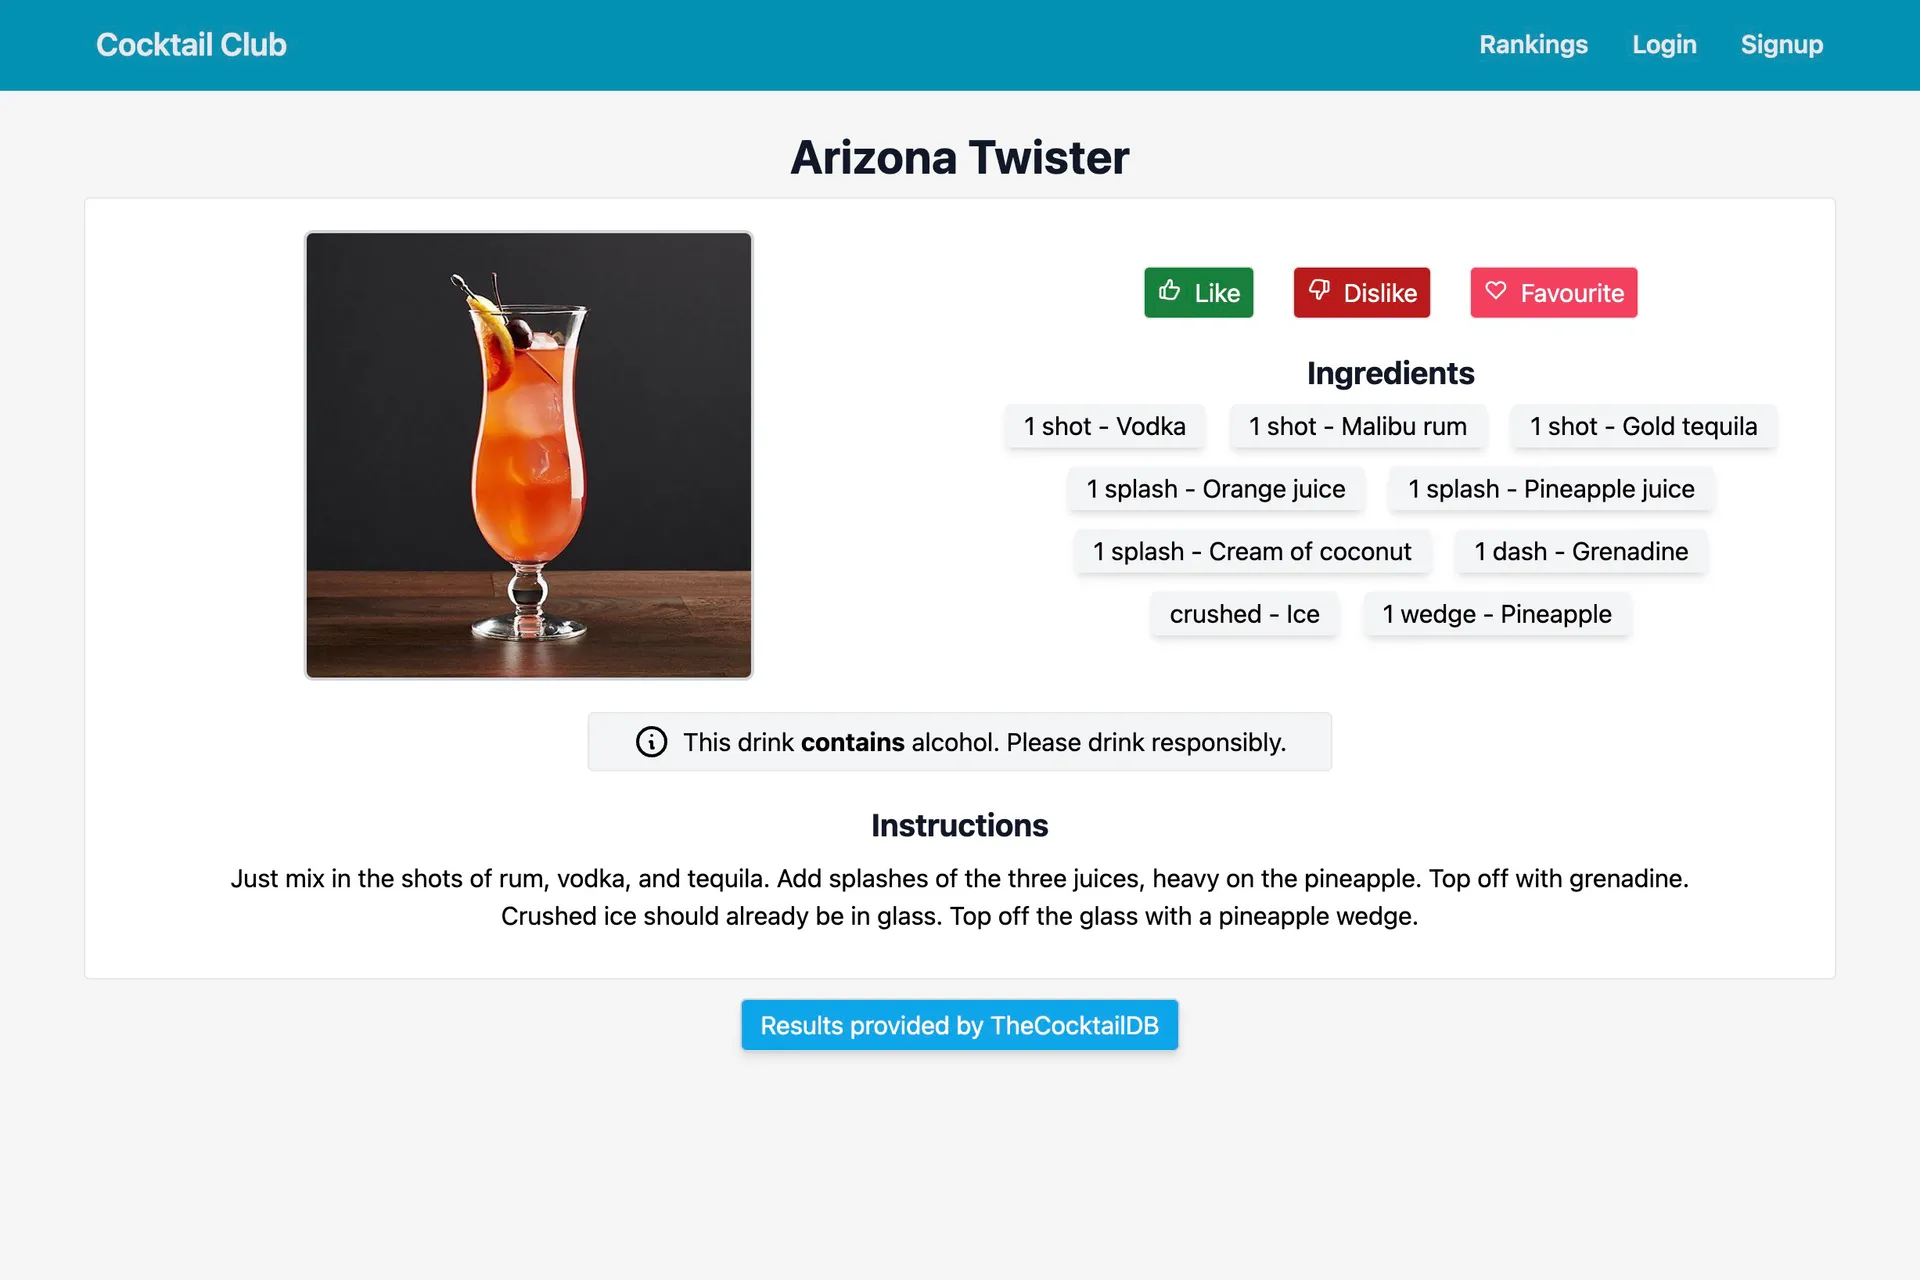 The Cocktail Clubs Drinks page